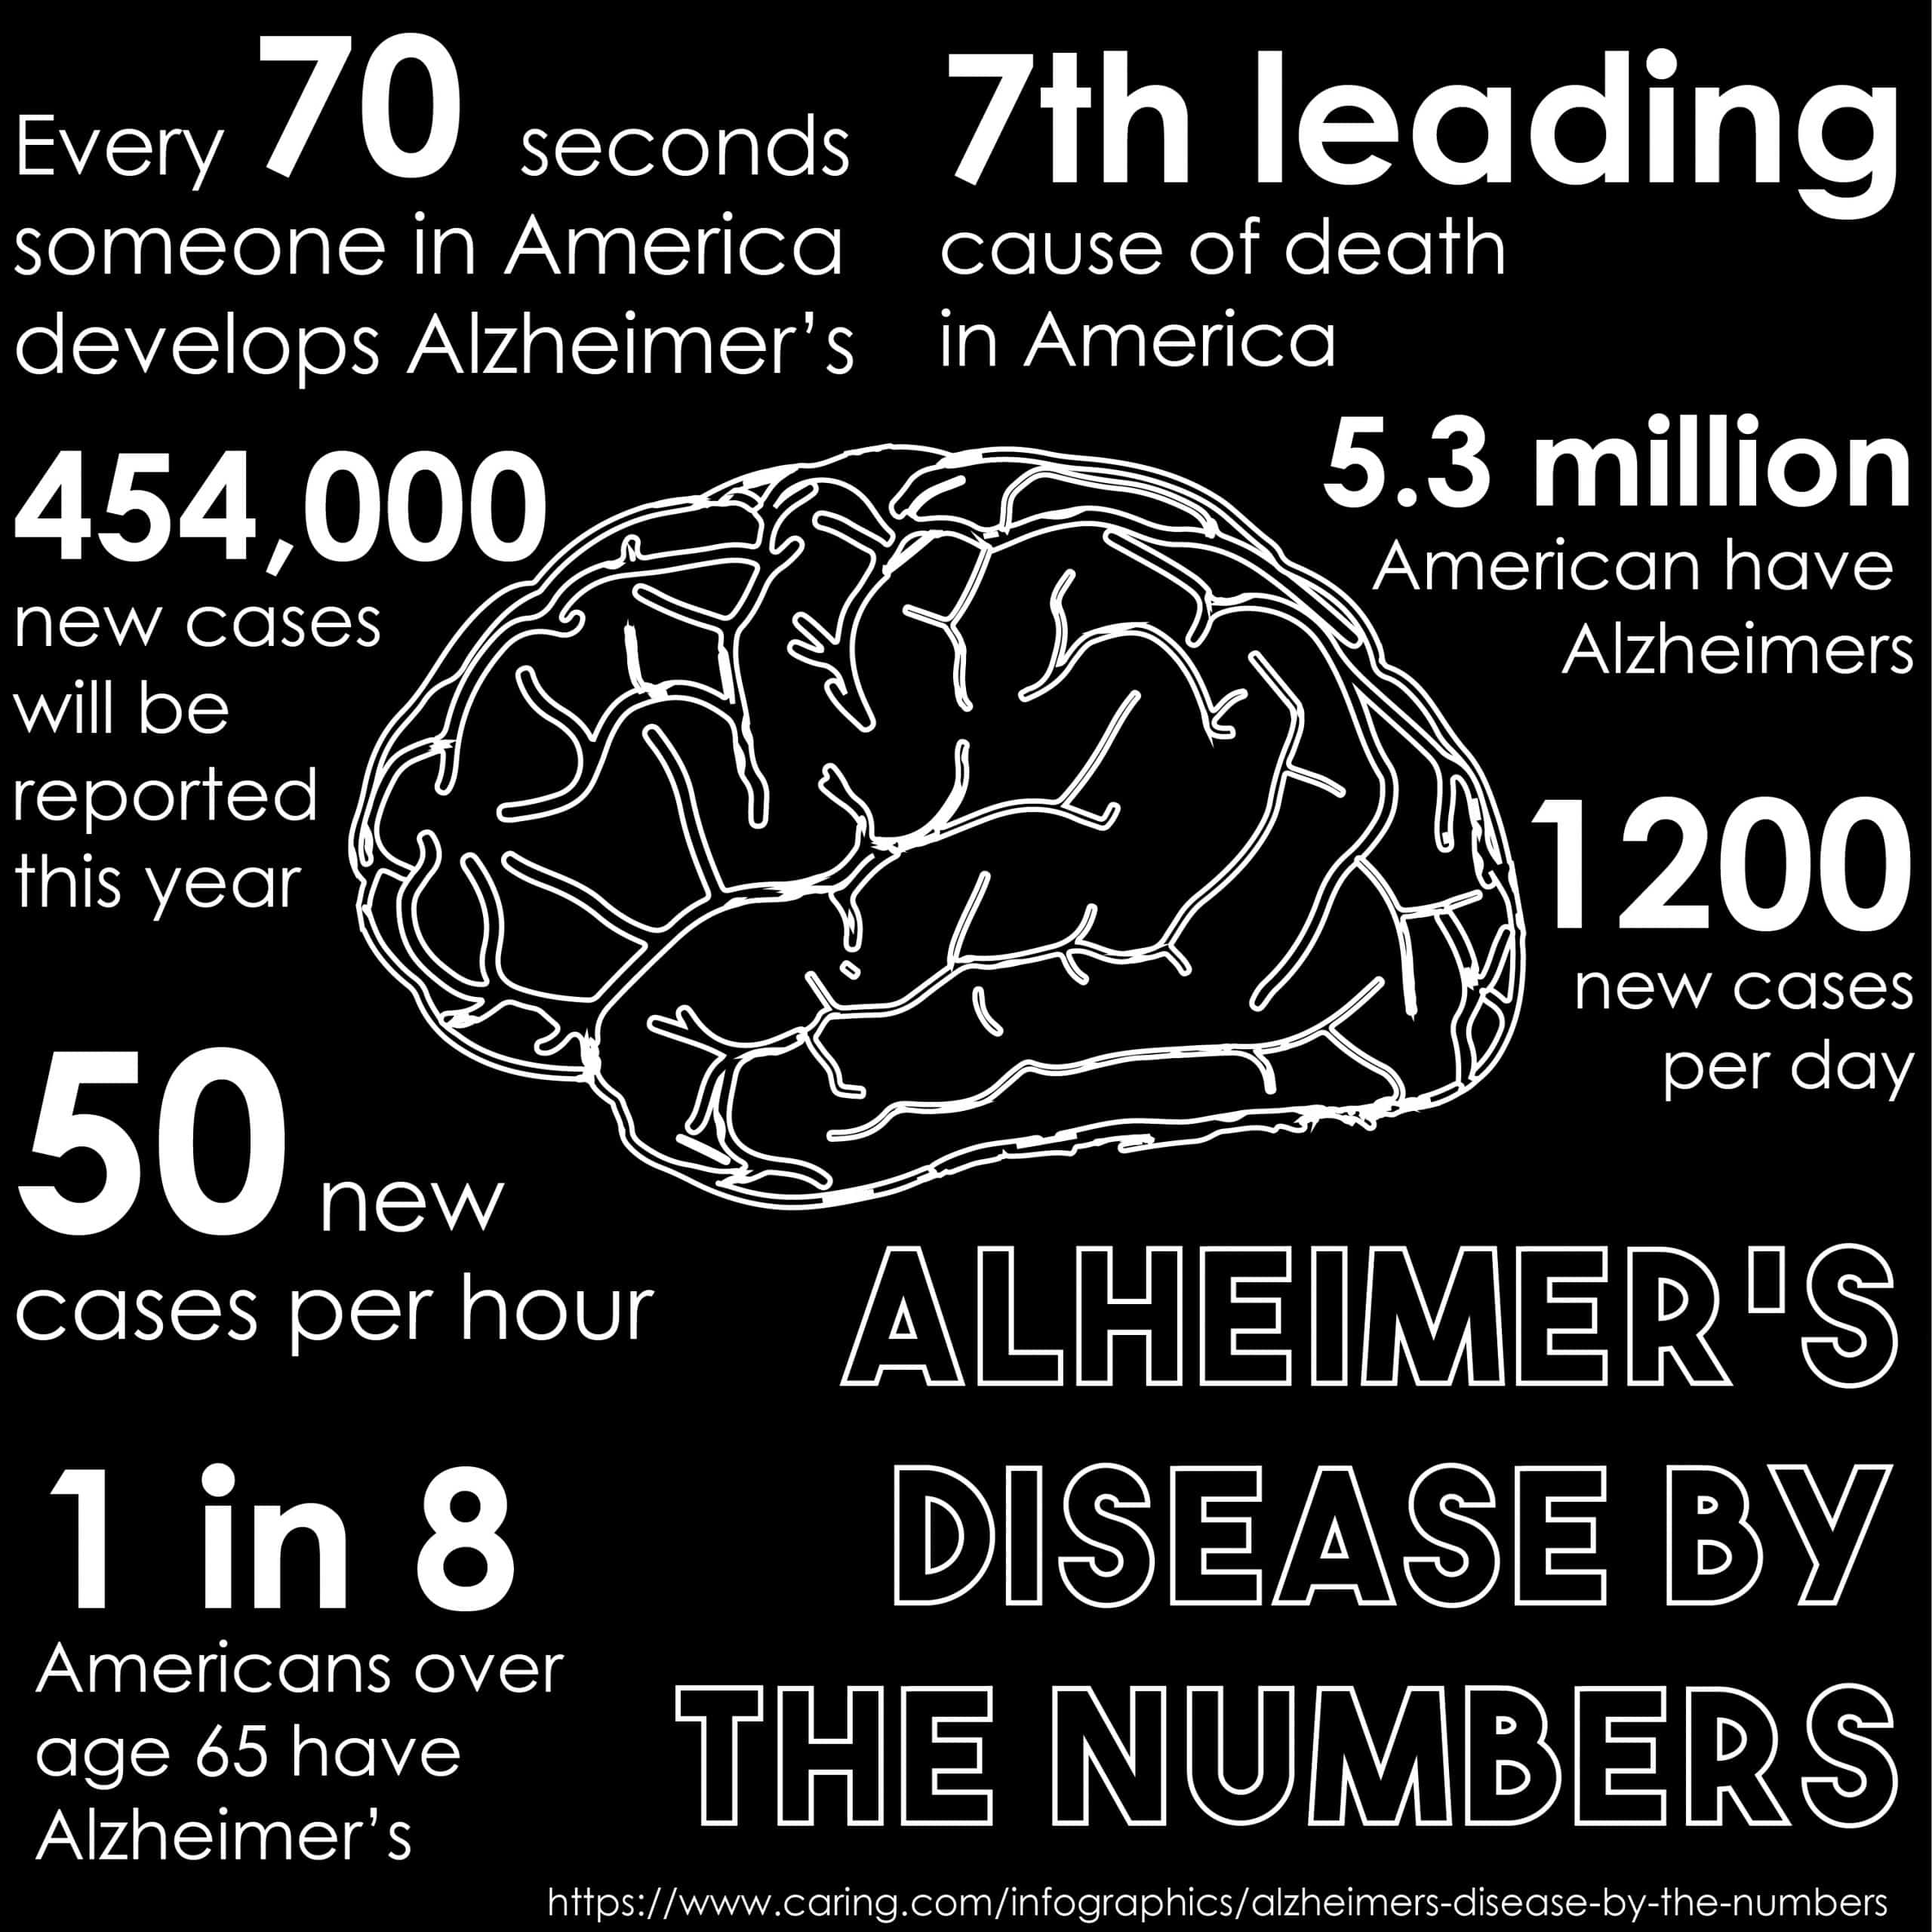 Sleep deprivation leads to Alzheimers